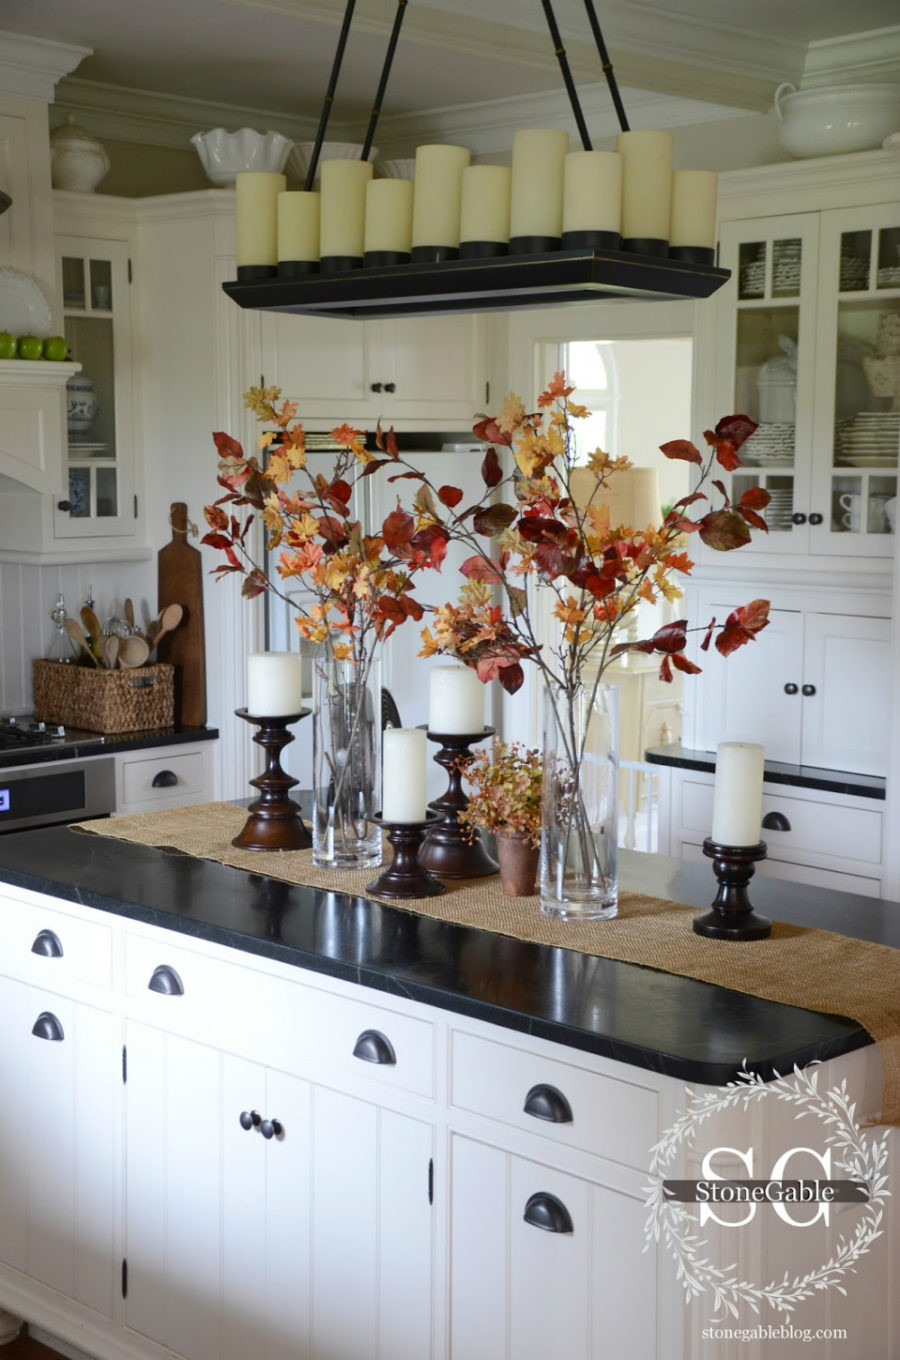 Autumn Kitchen Curtains
 Kitchen Fall Decor Ideas That Are Simply Beautiful